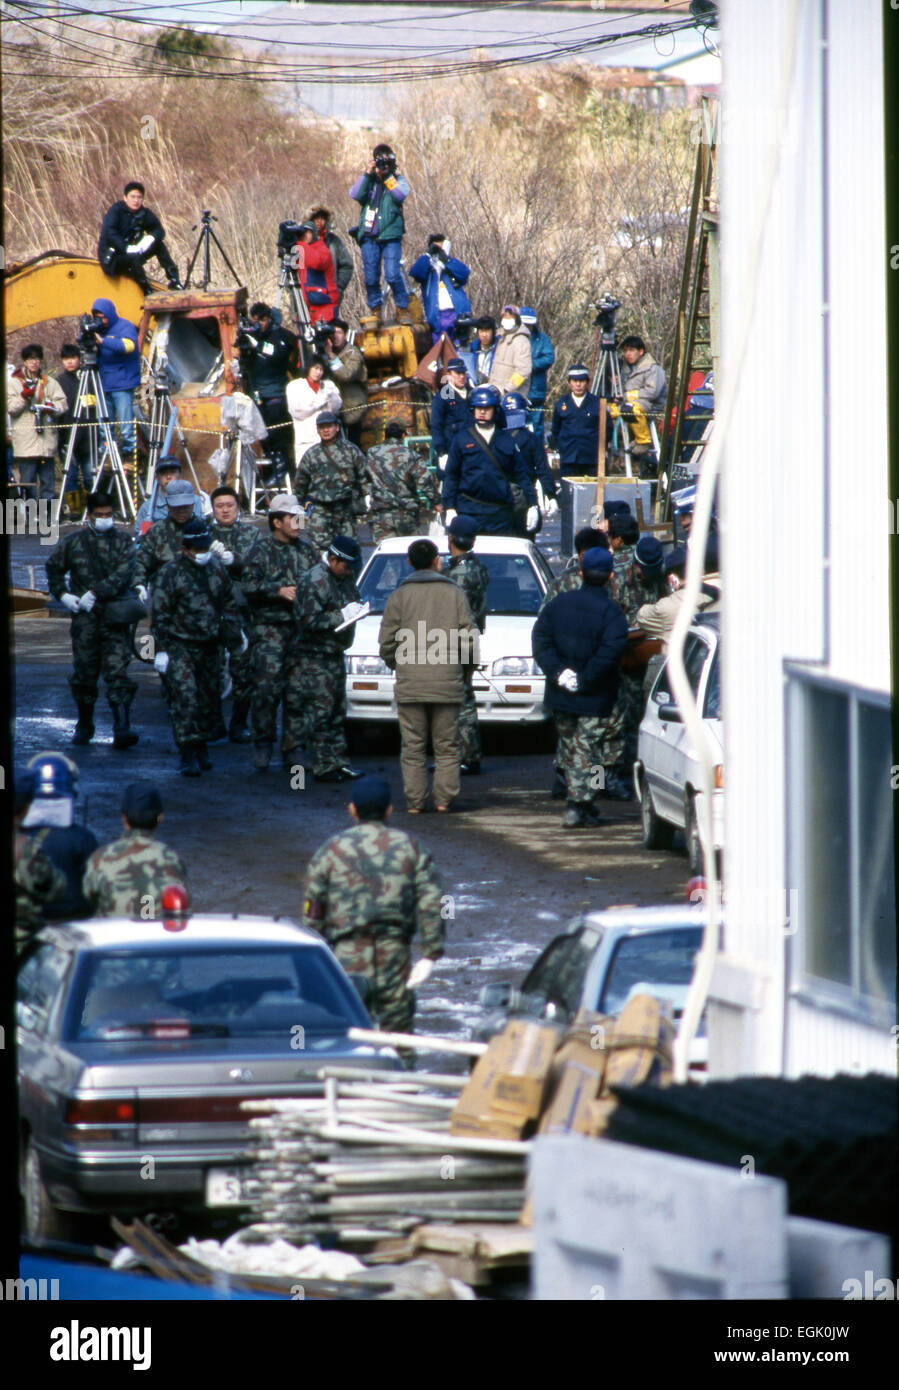 March, 1995, Kamikuisshiki Mura, Japan - Police confiscate explosives, chemical weapons and biological warfare agents during a raid on Aum's facility - No. 7 Satyam - on the foot of Mt. Fuji in March 1995. On the morning of 20 March 1995, cult members released sarin in a coordinated attack on five trains in the Tokyo subway system, killing 13 commuters, seriously injuring 54 and affecting 980 more. Some estimates claim as many as 6,000 people were injured by the sarin. © Haruyoshi Yamaguchi/AFLO/Alamy Live News Stock Photo